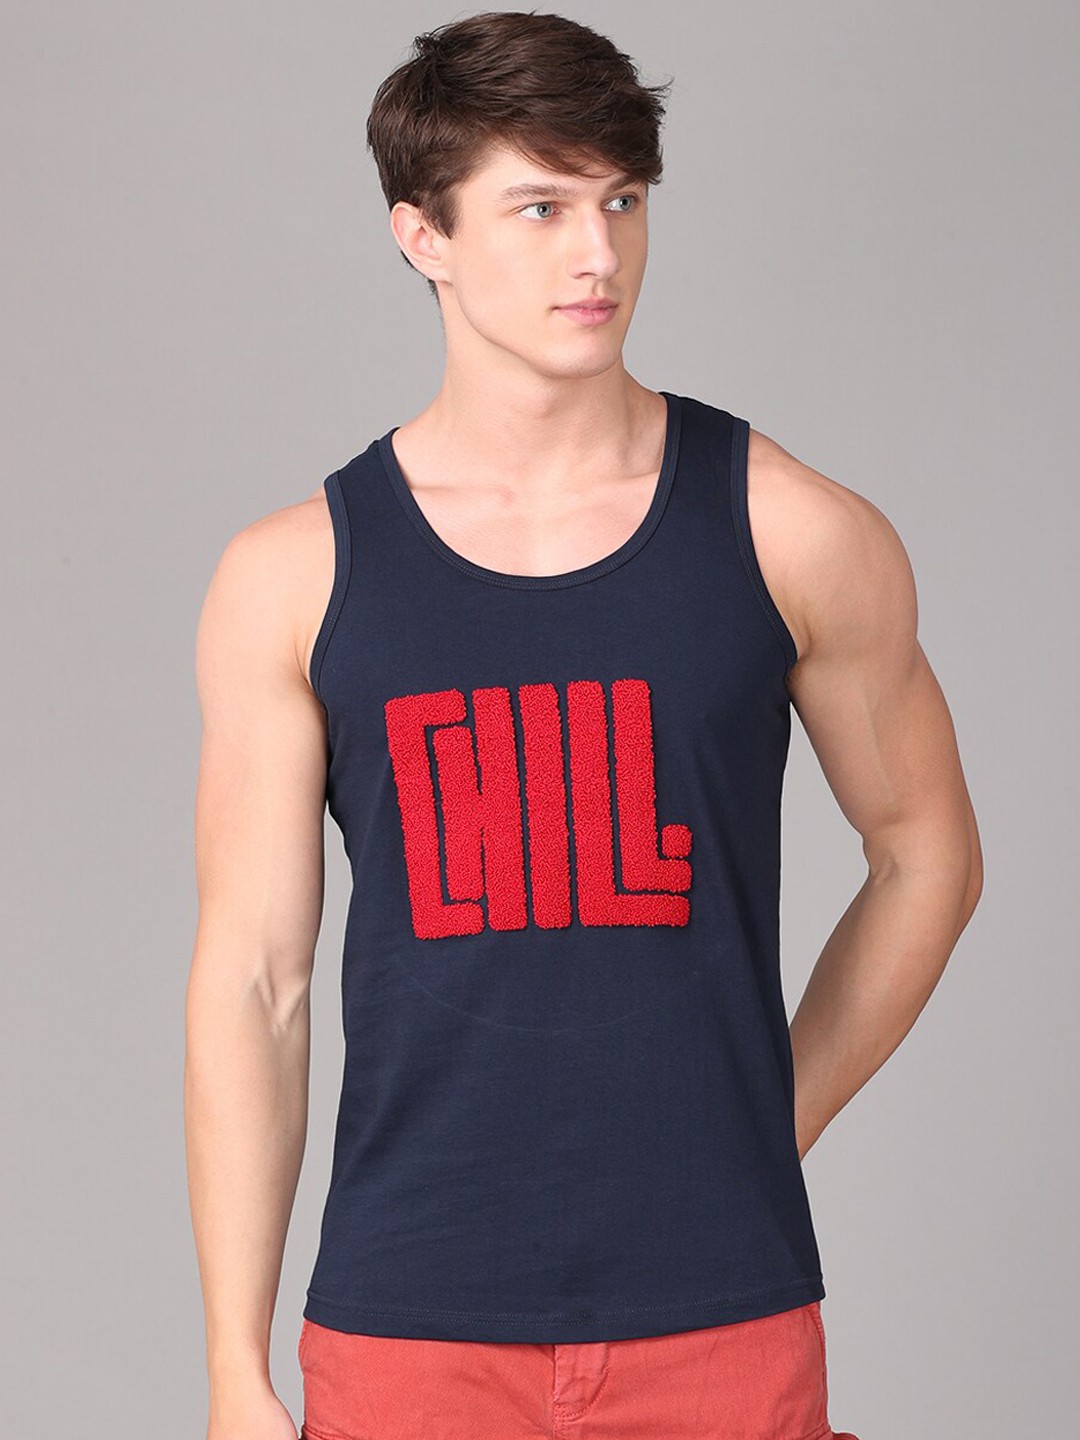 Clothing Innerwear Vests | IMYOUNG Men Navy Blue & Red Typography Printed Innerwear Vests - MQ91813